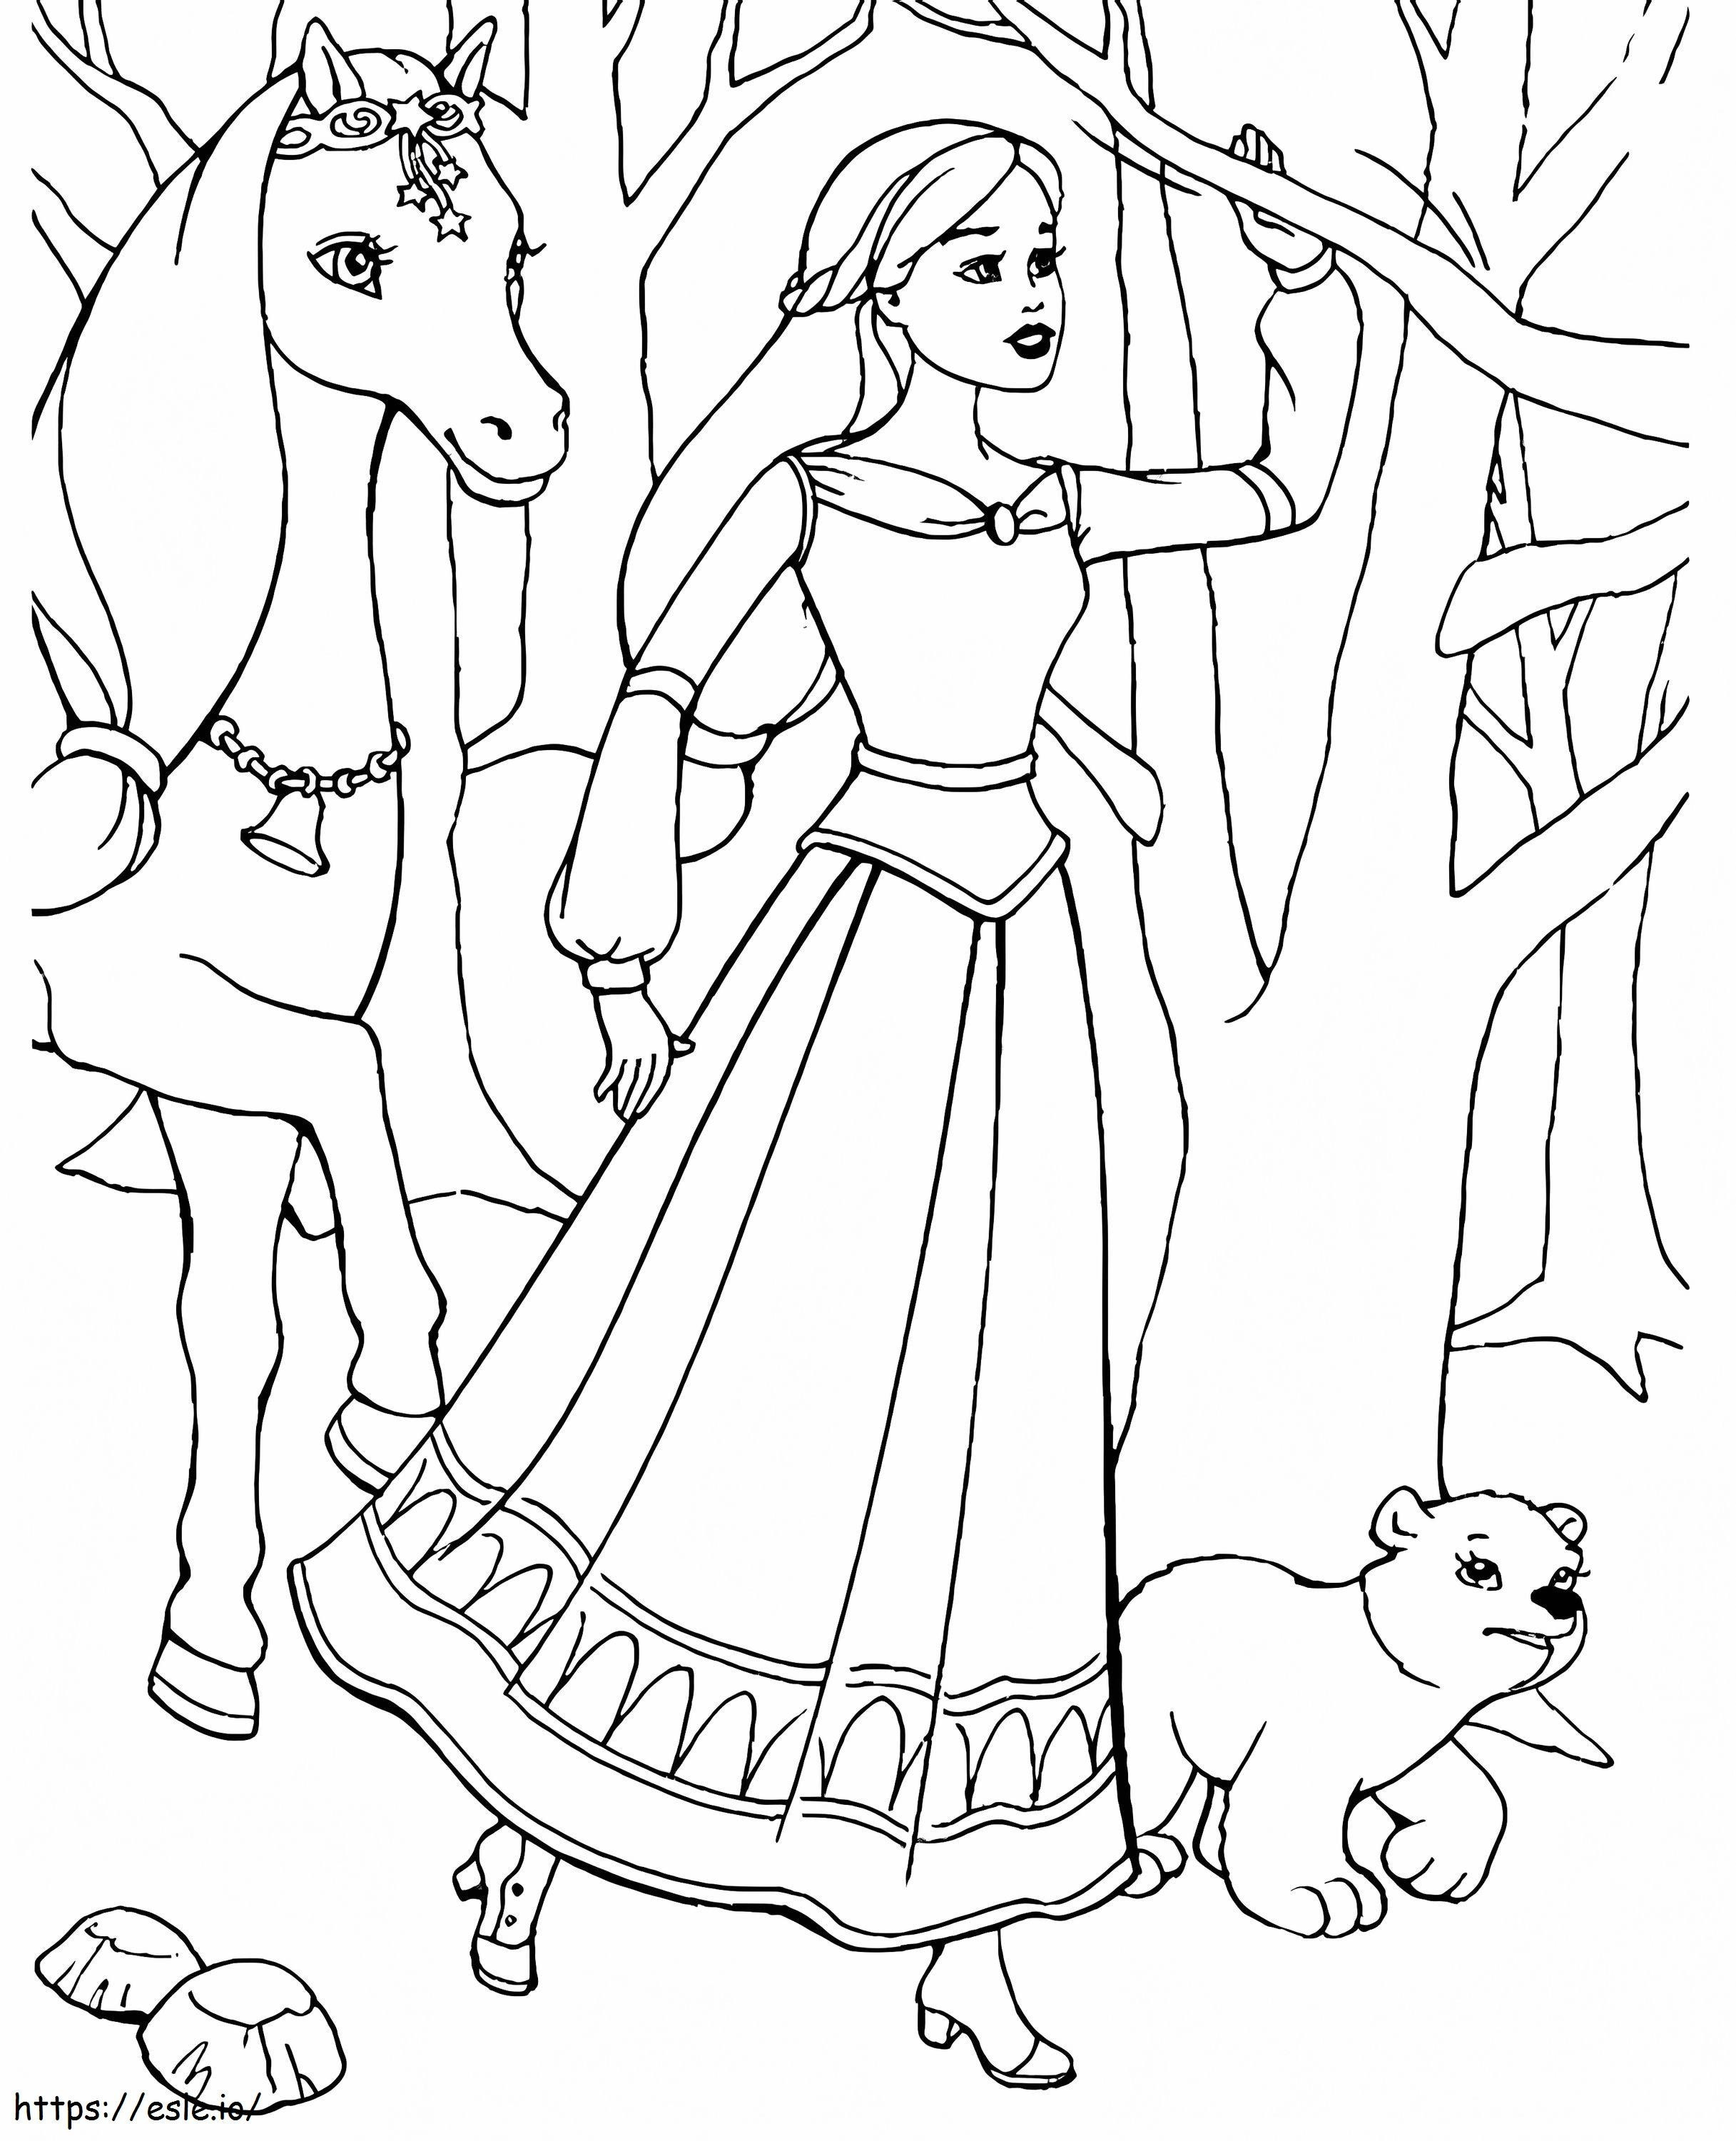 Barbie 8 coloring page